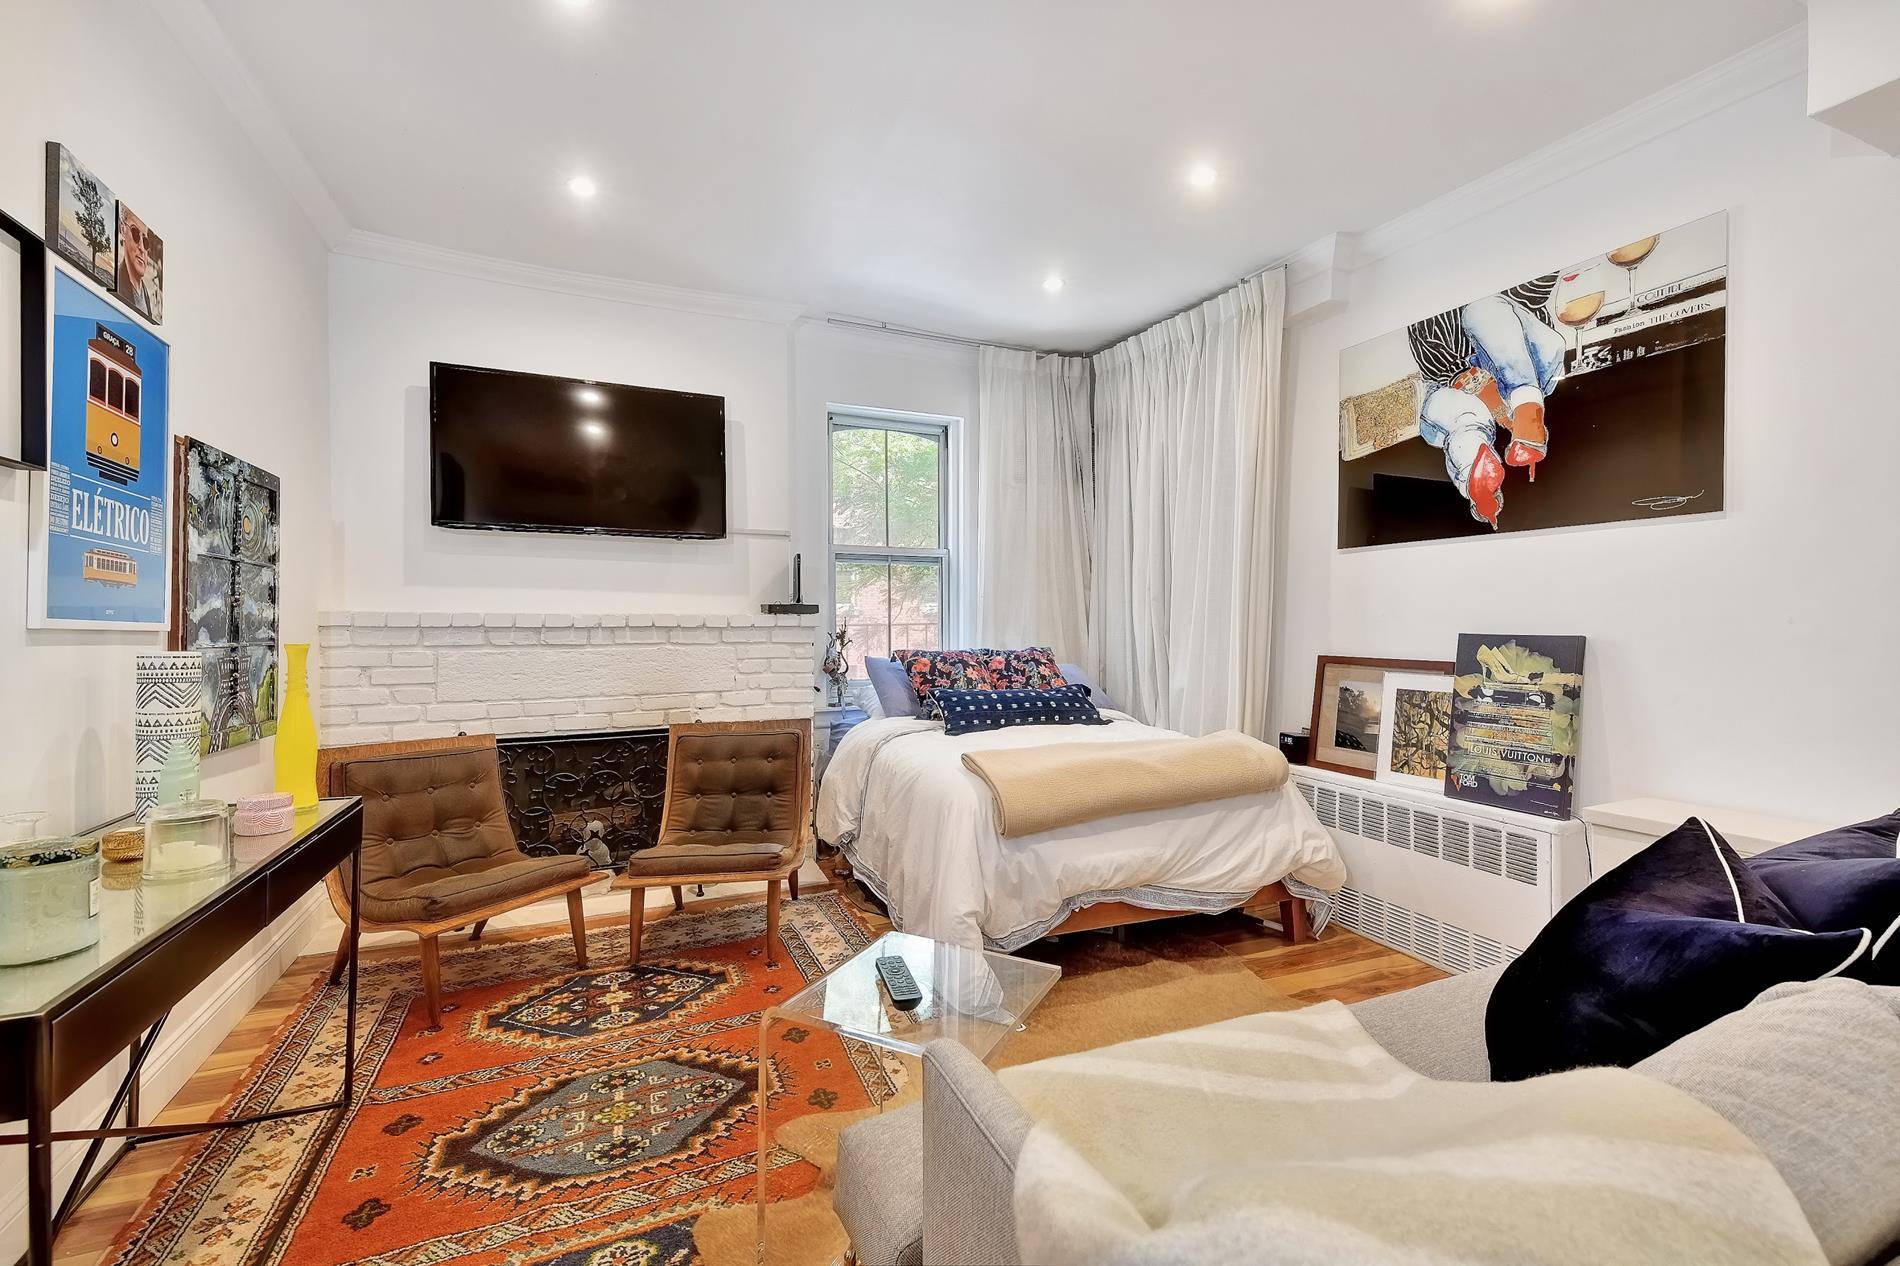 10 REDUCTION ! MOTIVATED SELLERLocated on a cobble stone, tree lined street this studio is in the heart of the West Village.